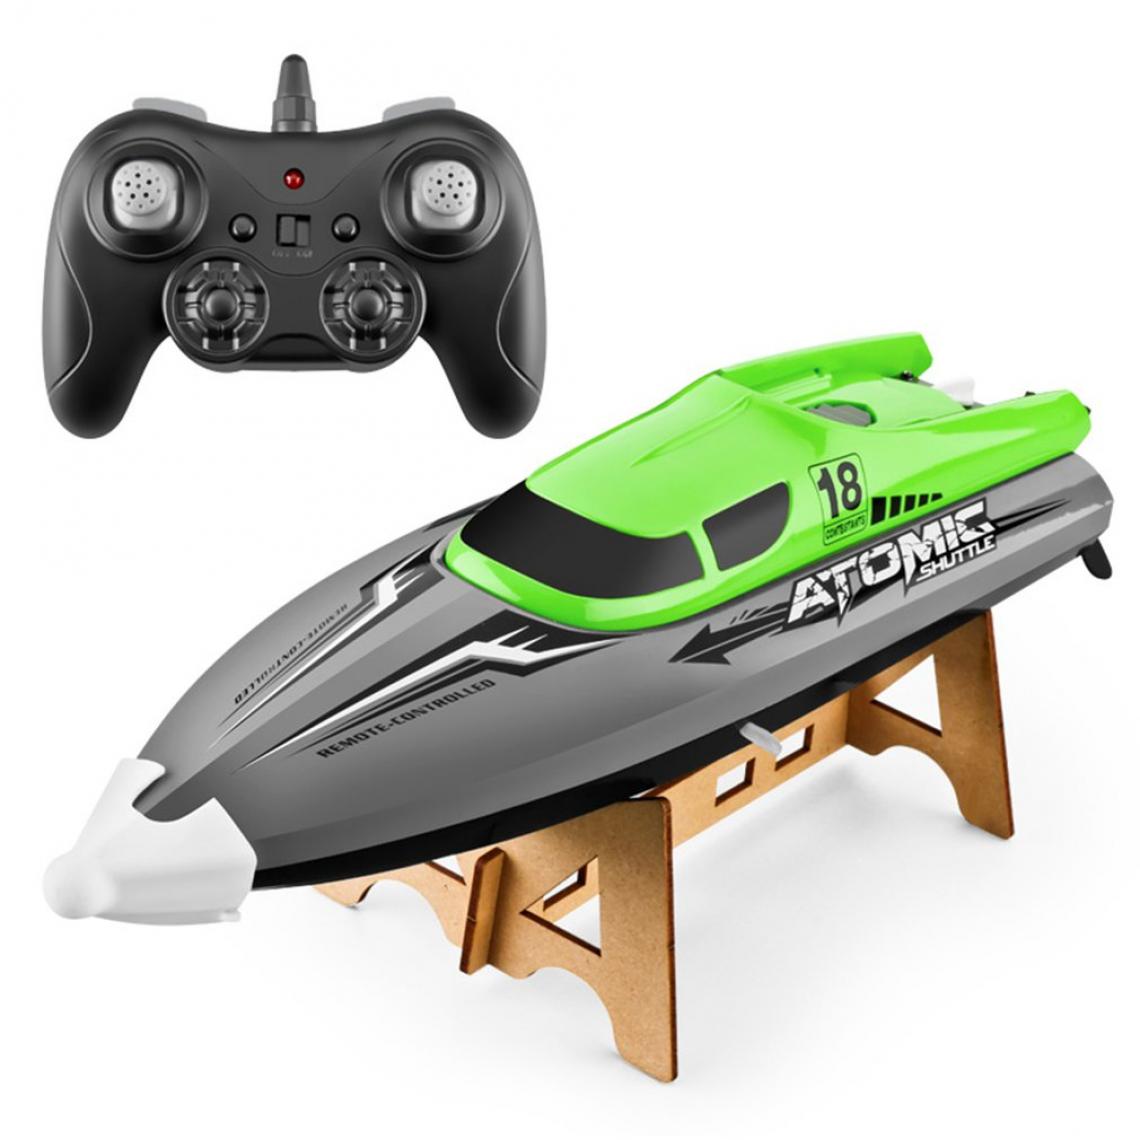 Universal - 2.4g High Speed Remote Control Boat(Green) - Bateaux RC